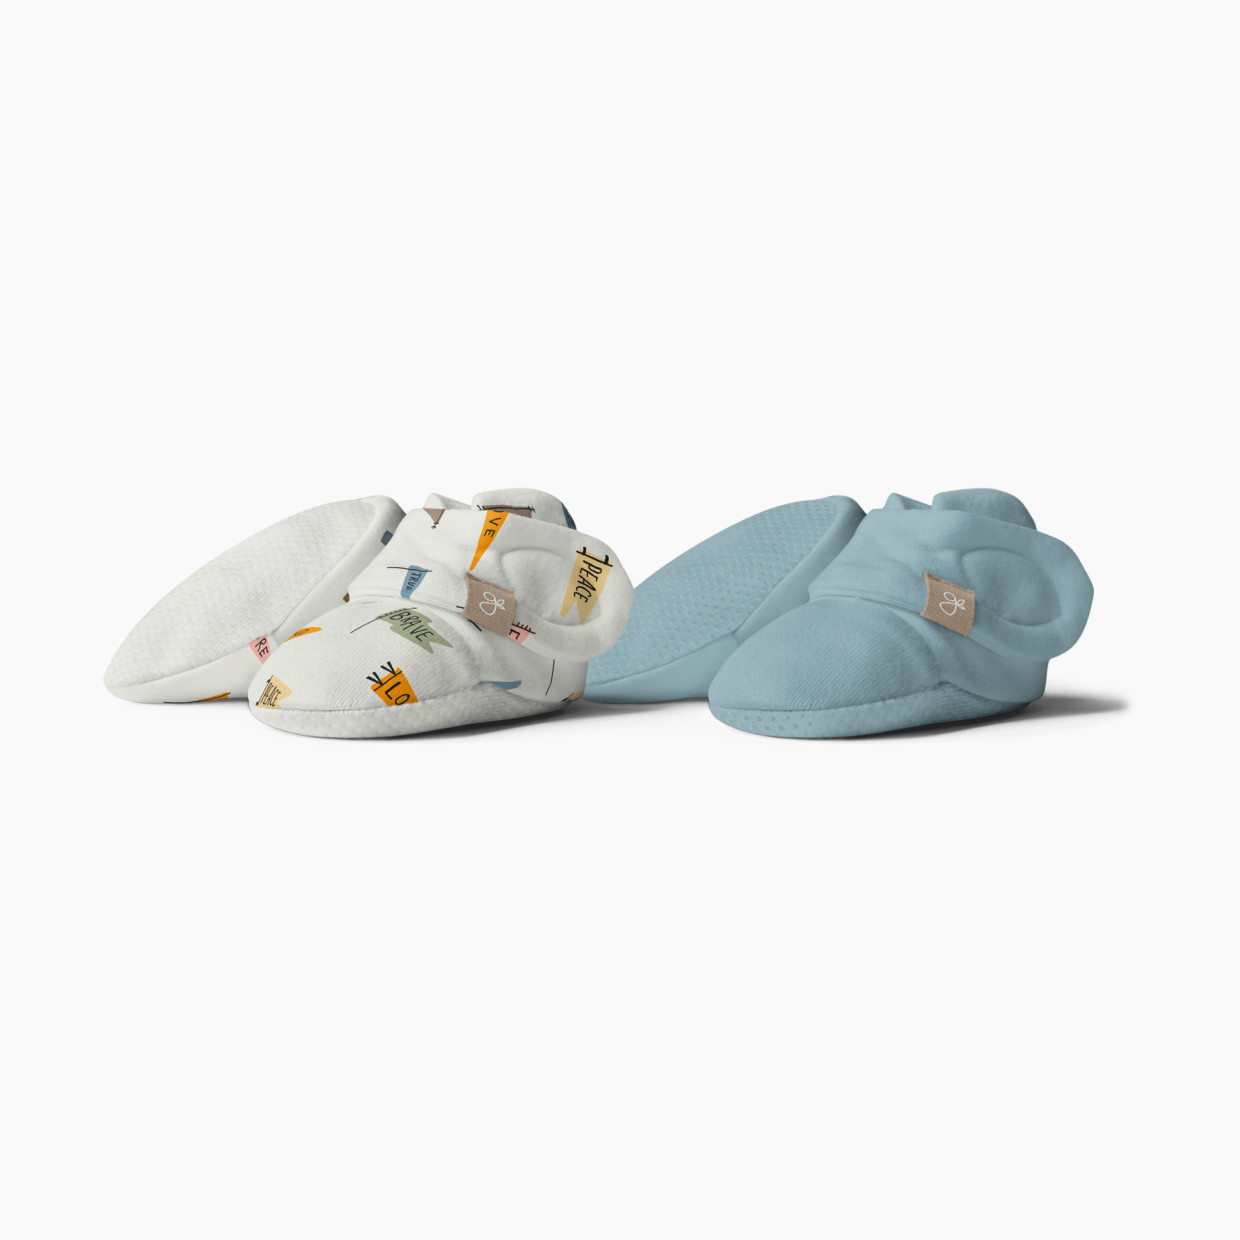 Goumi Kids Stay on Baby Booties (2 pack) - Affirmations + Poolside, 3-6 M.